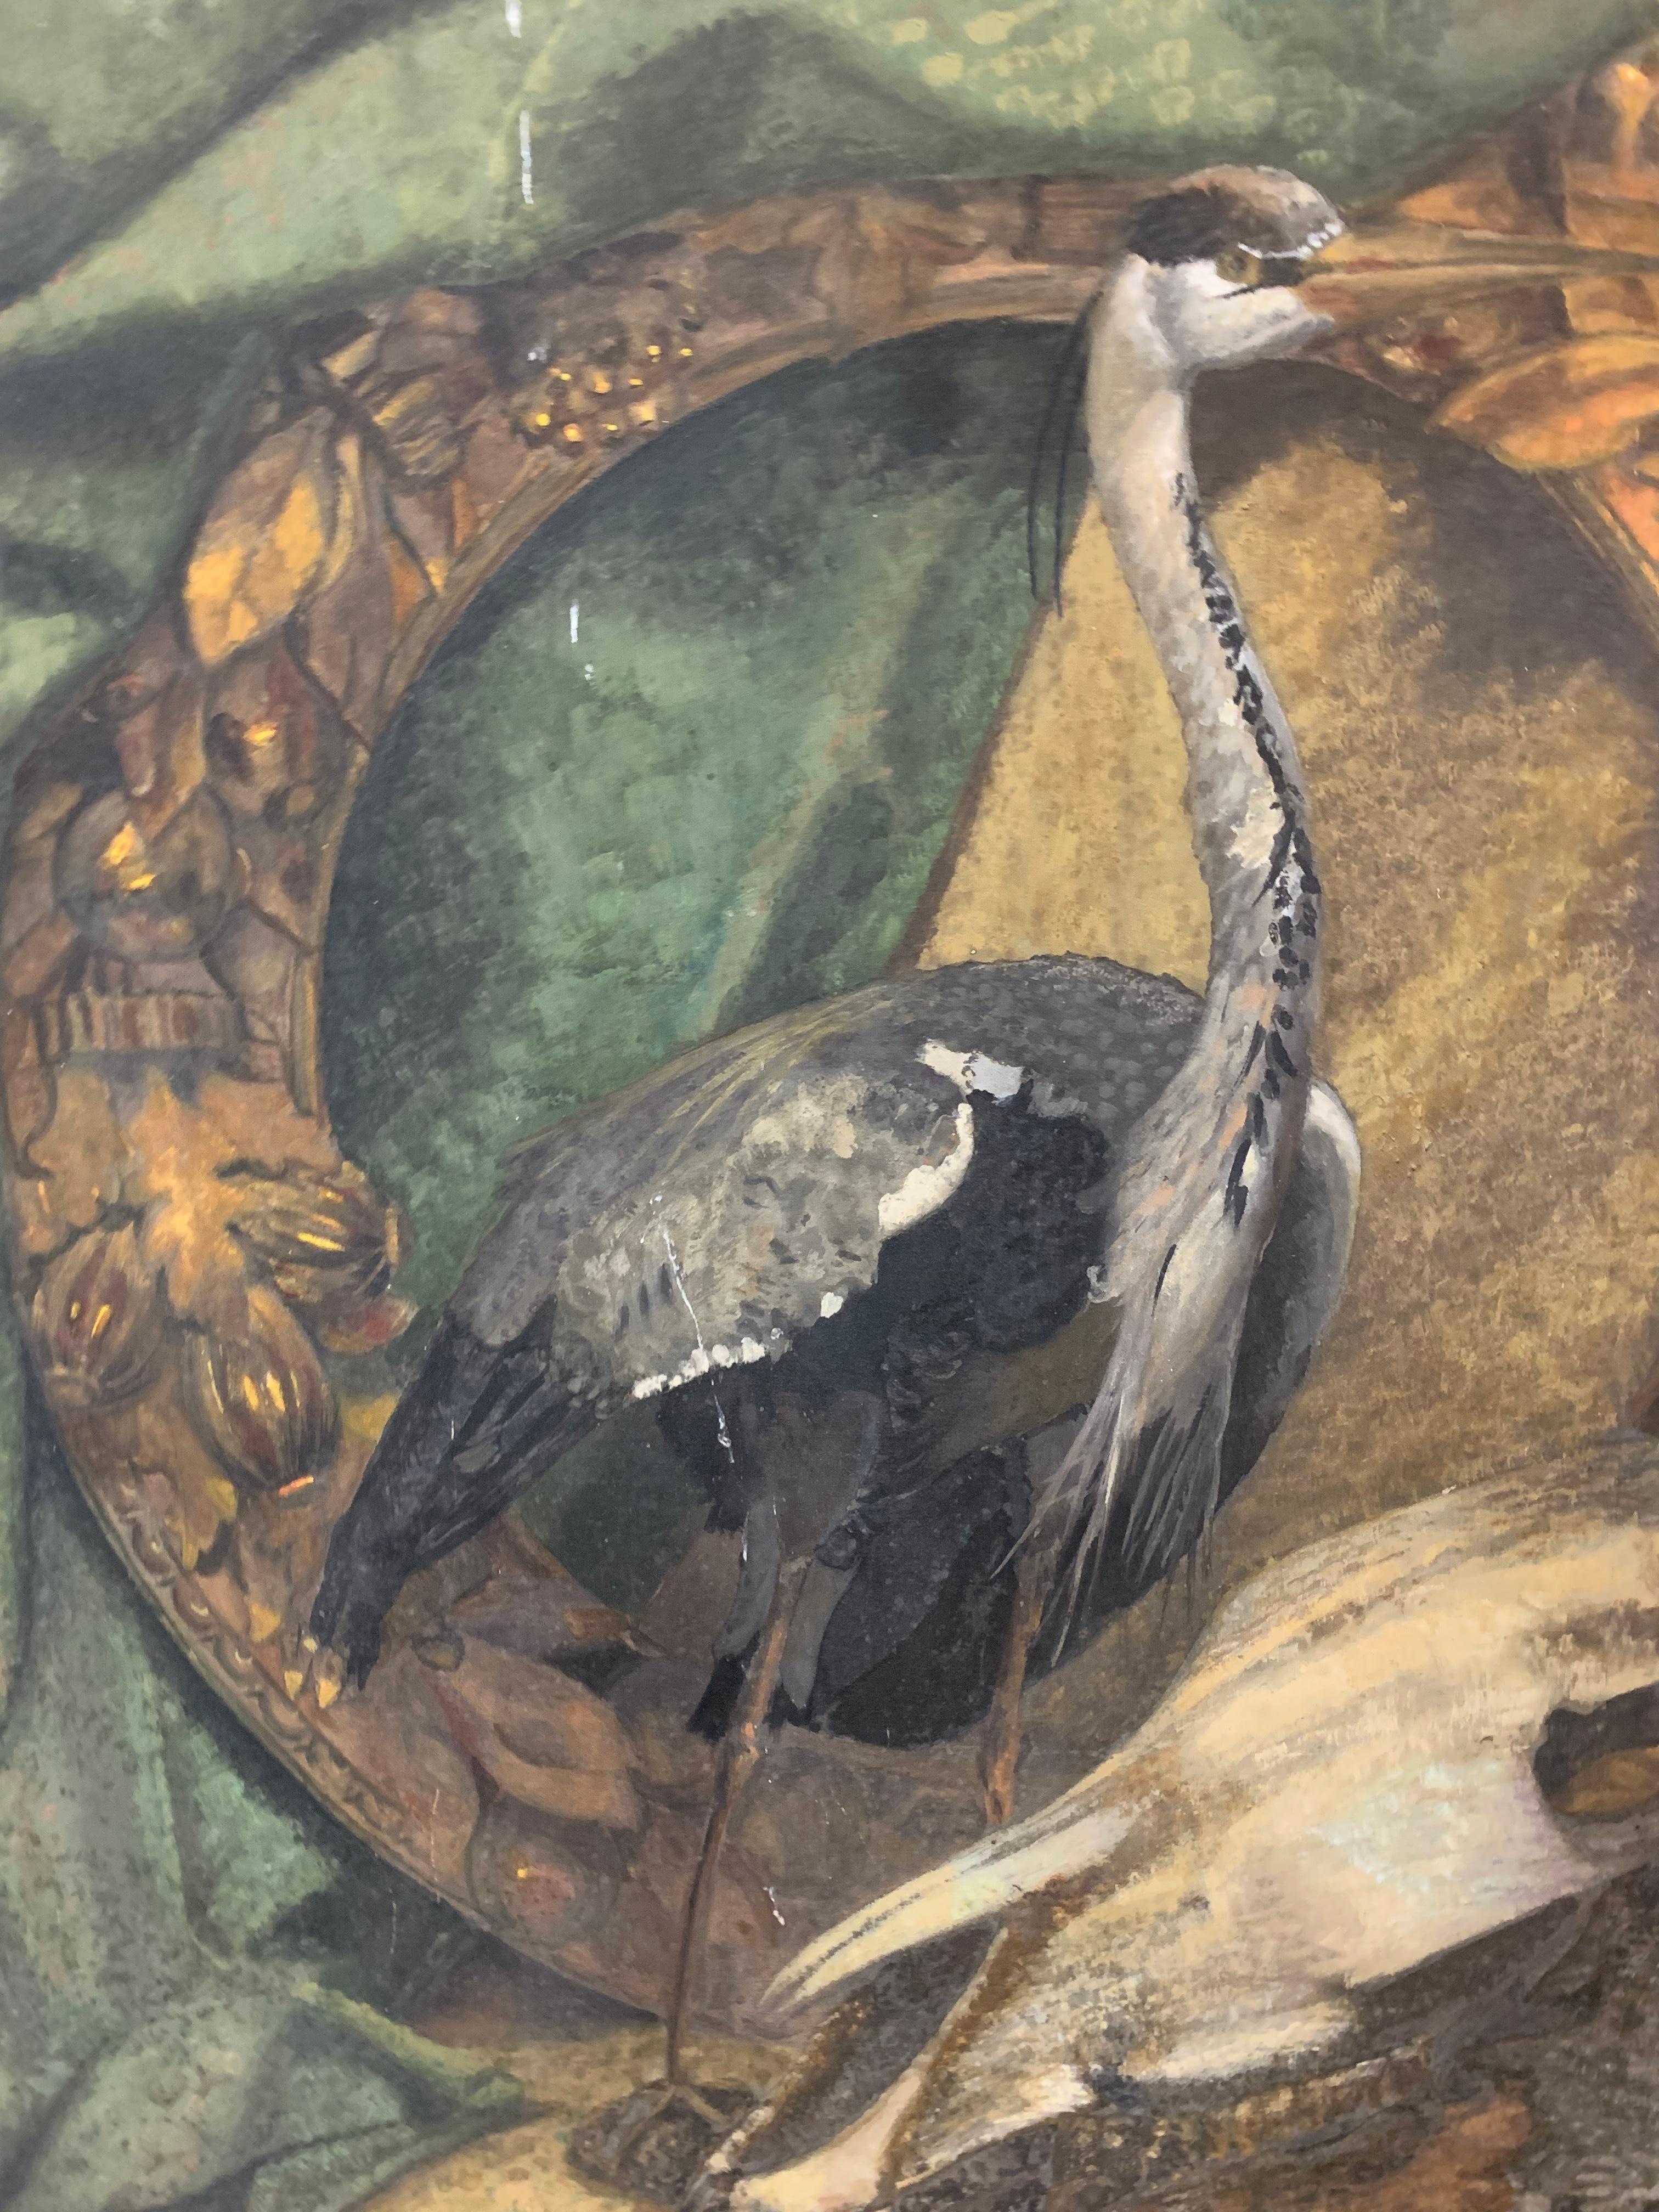 Memento mori, memento vive: Garland with Heron and skull.

Technique: tempera on canvas.
Signed below: G. Borgogelli-Ottaviani, probably refers to the Italian aristocratic family, with properties in the Marche region, to which the painting